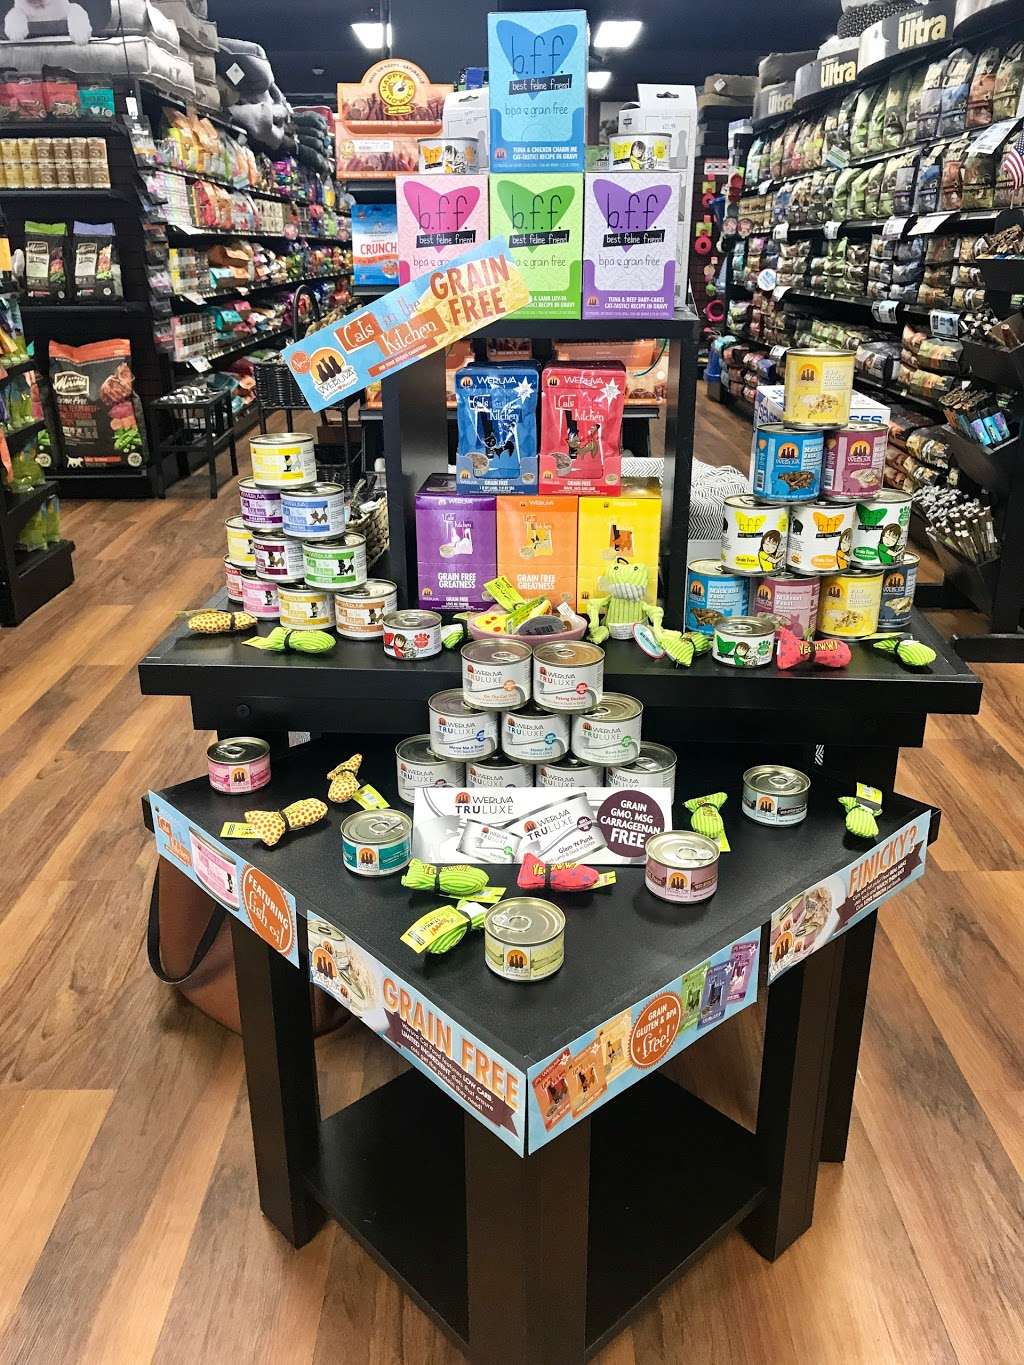 Pet Valu | 36 south route 9w, West Haverstraw, NY 10993, USA | Phone: (845) 241-5247